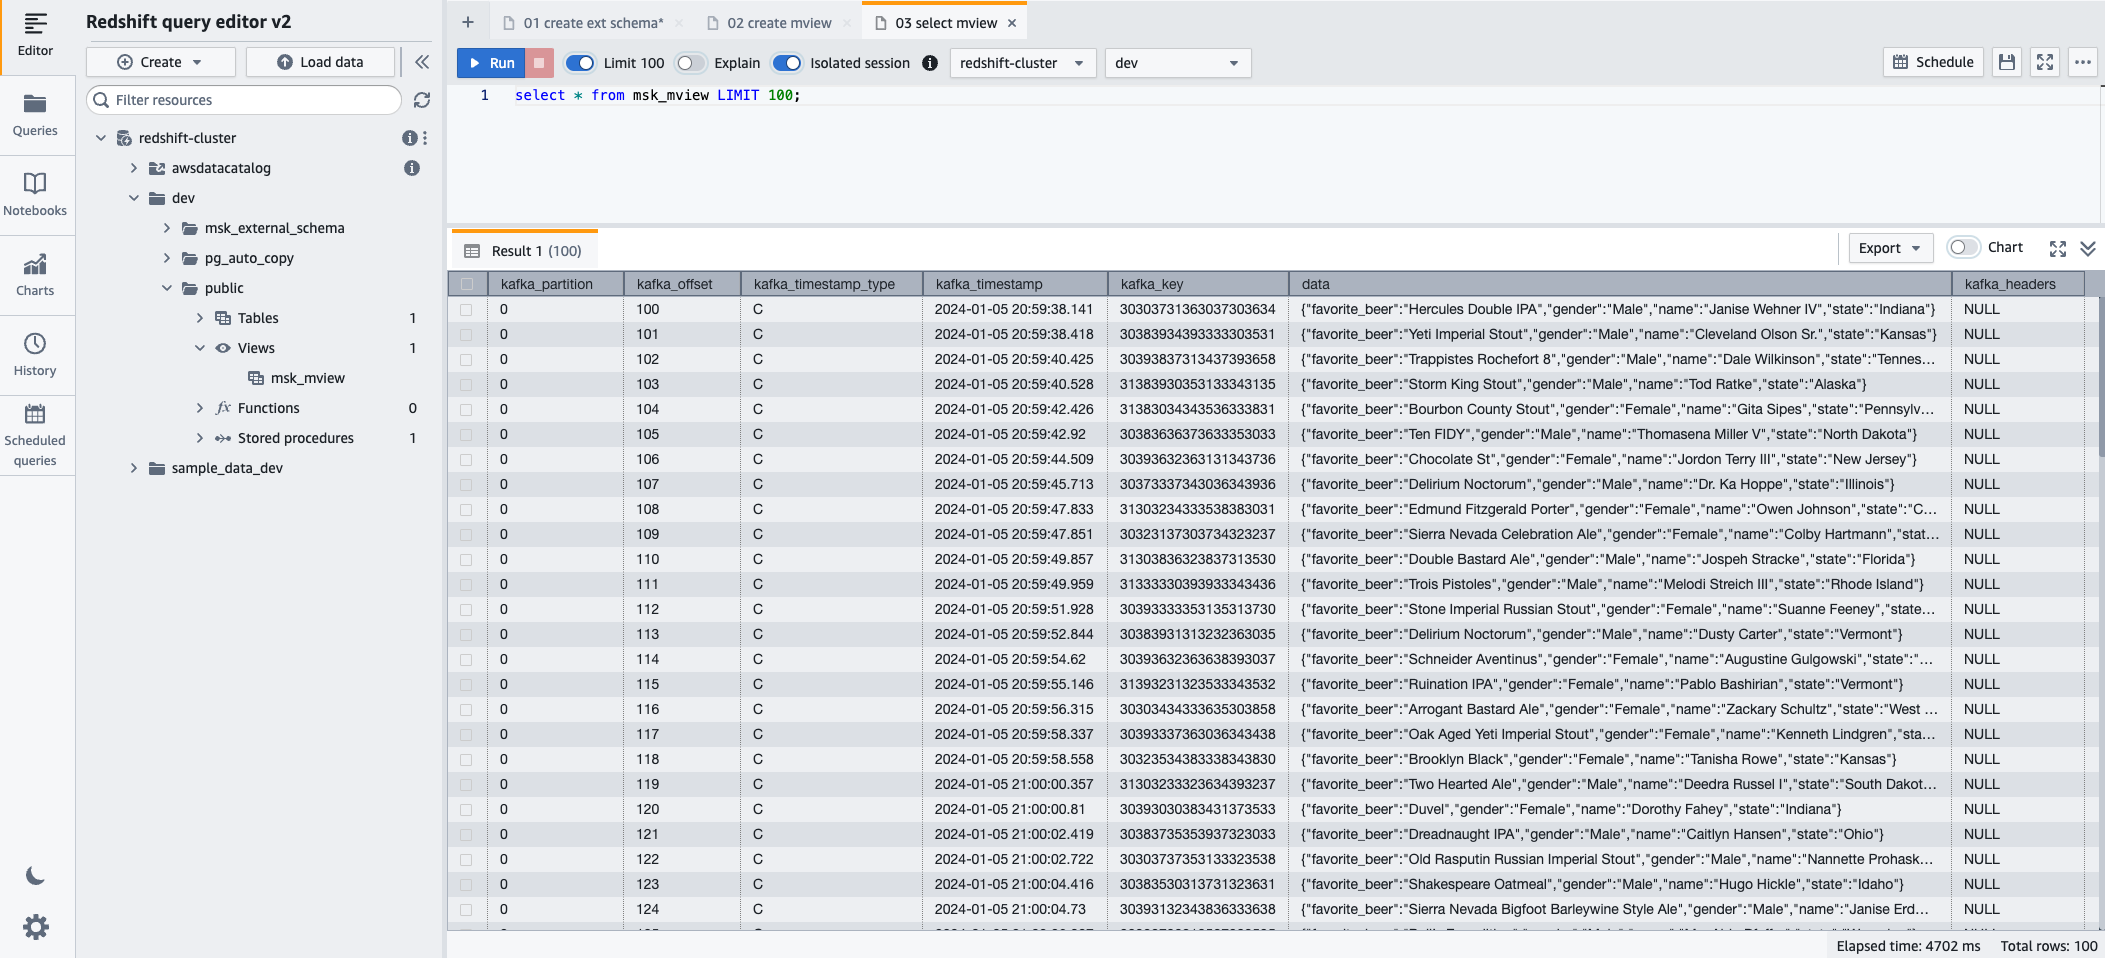 redshift query editor v2 showing the SQL statement used to query the materialized view